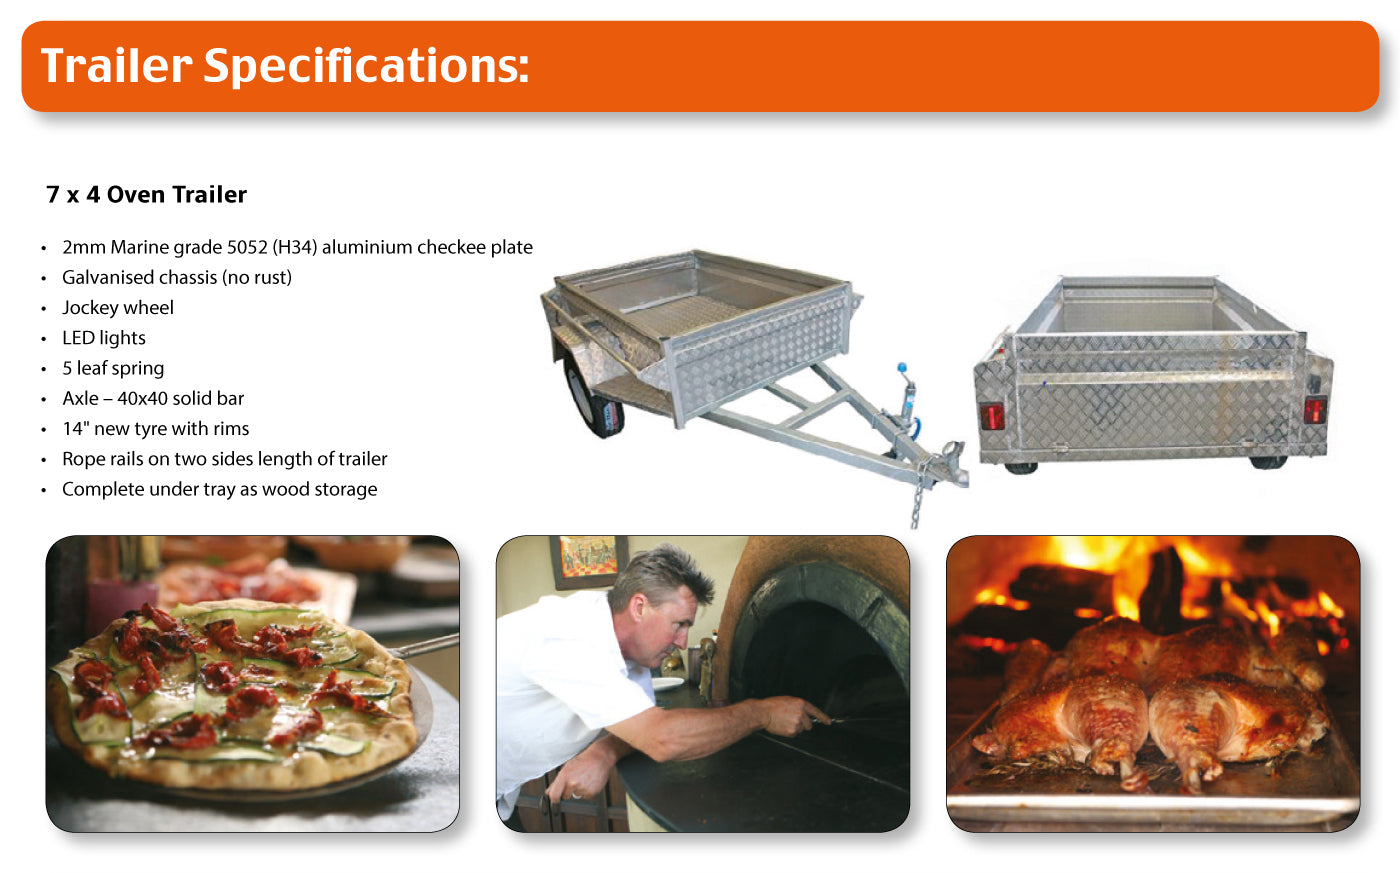 Trailer Pizza Oven: Trailer Specifications